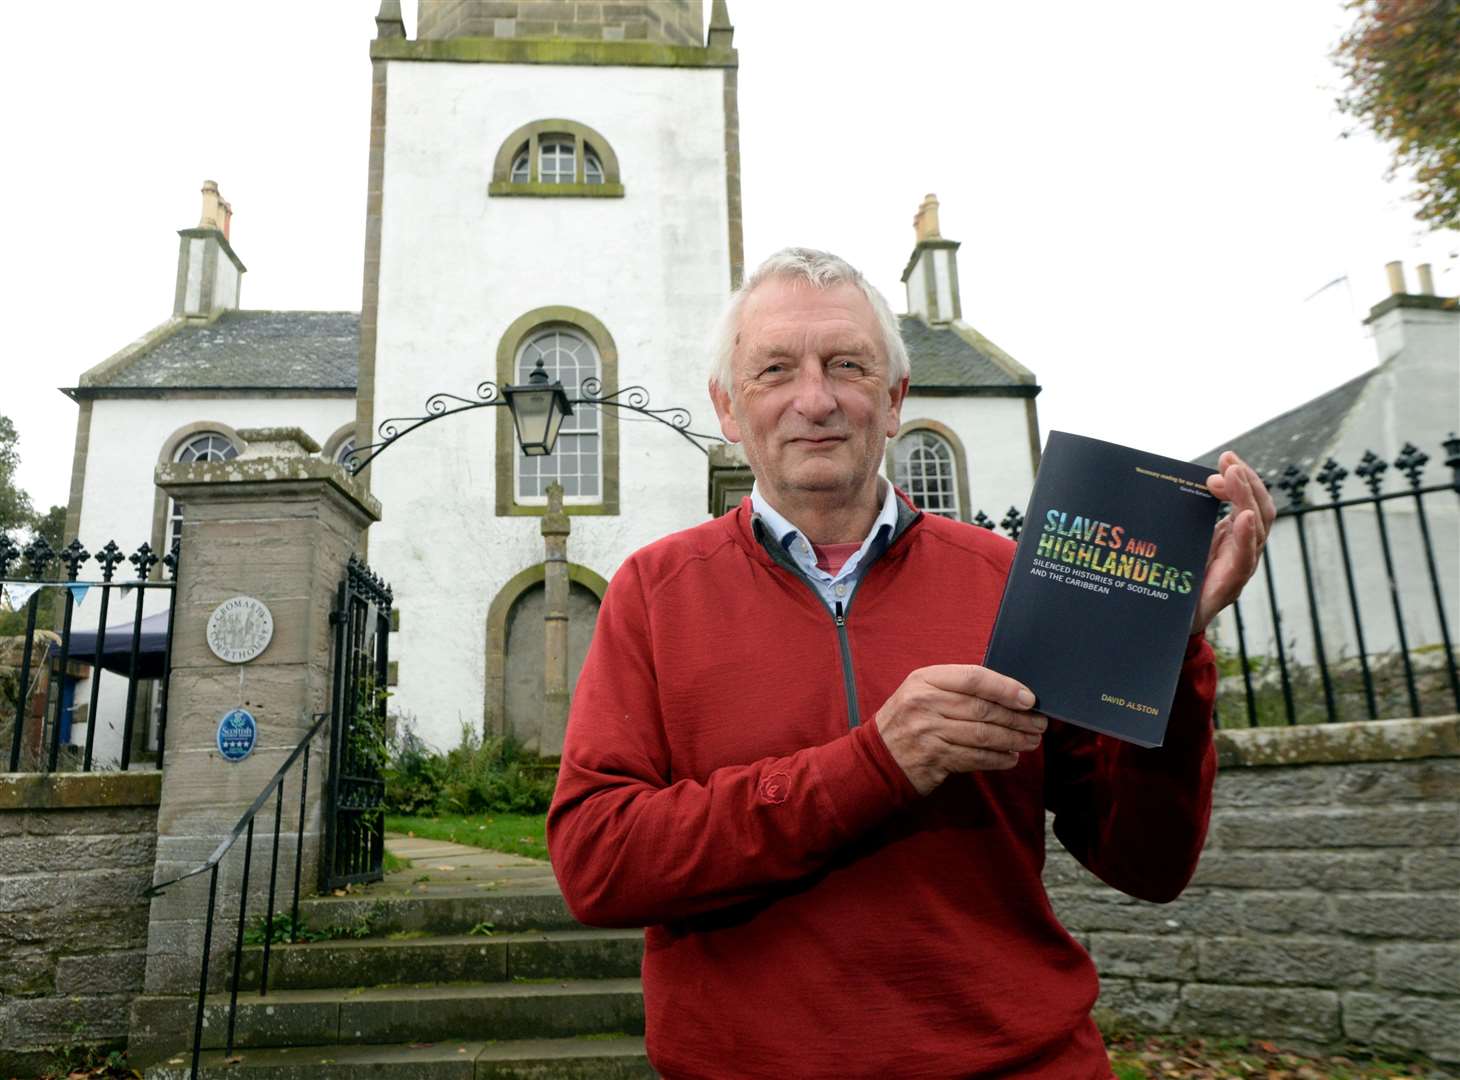 David Alston's book, Slaves and Highlanders: David Alston outside Cromarty Courthouse. Picture: James Mackenzie.